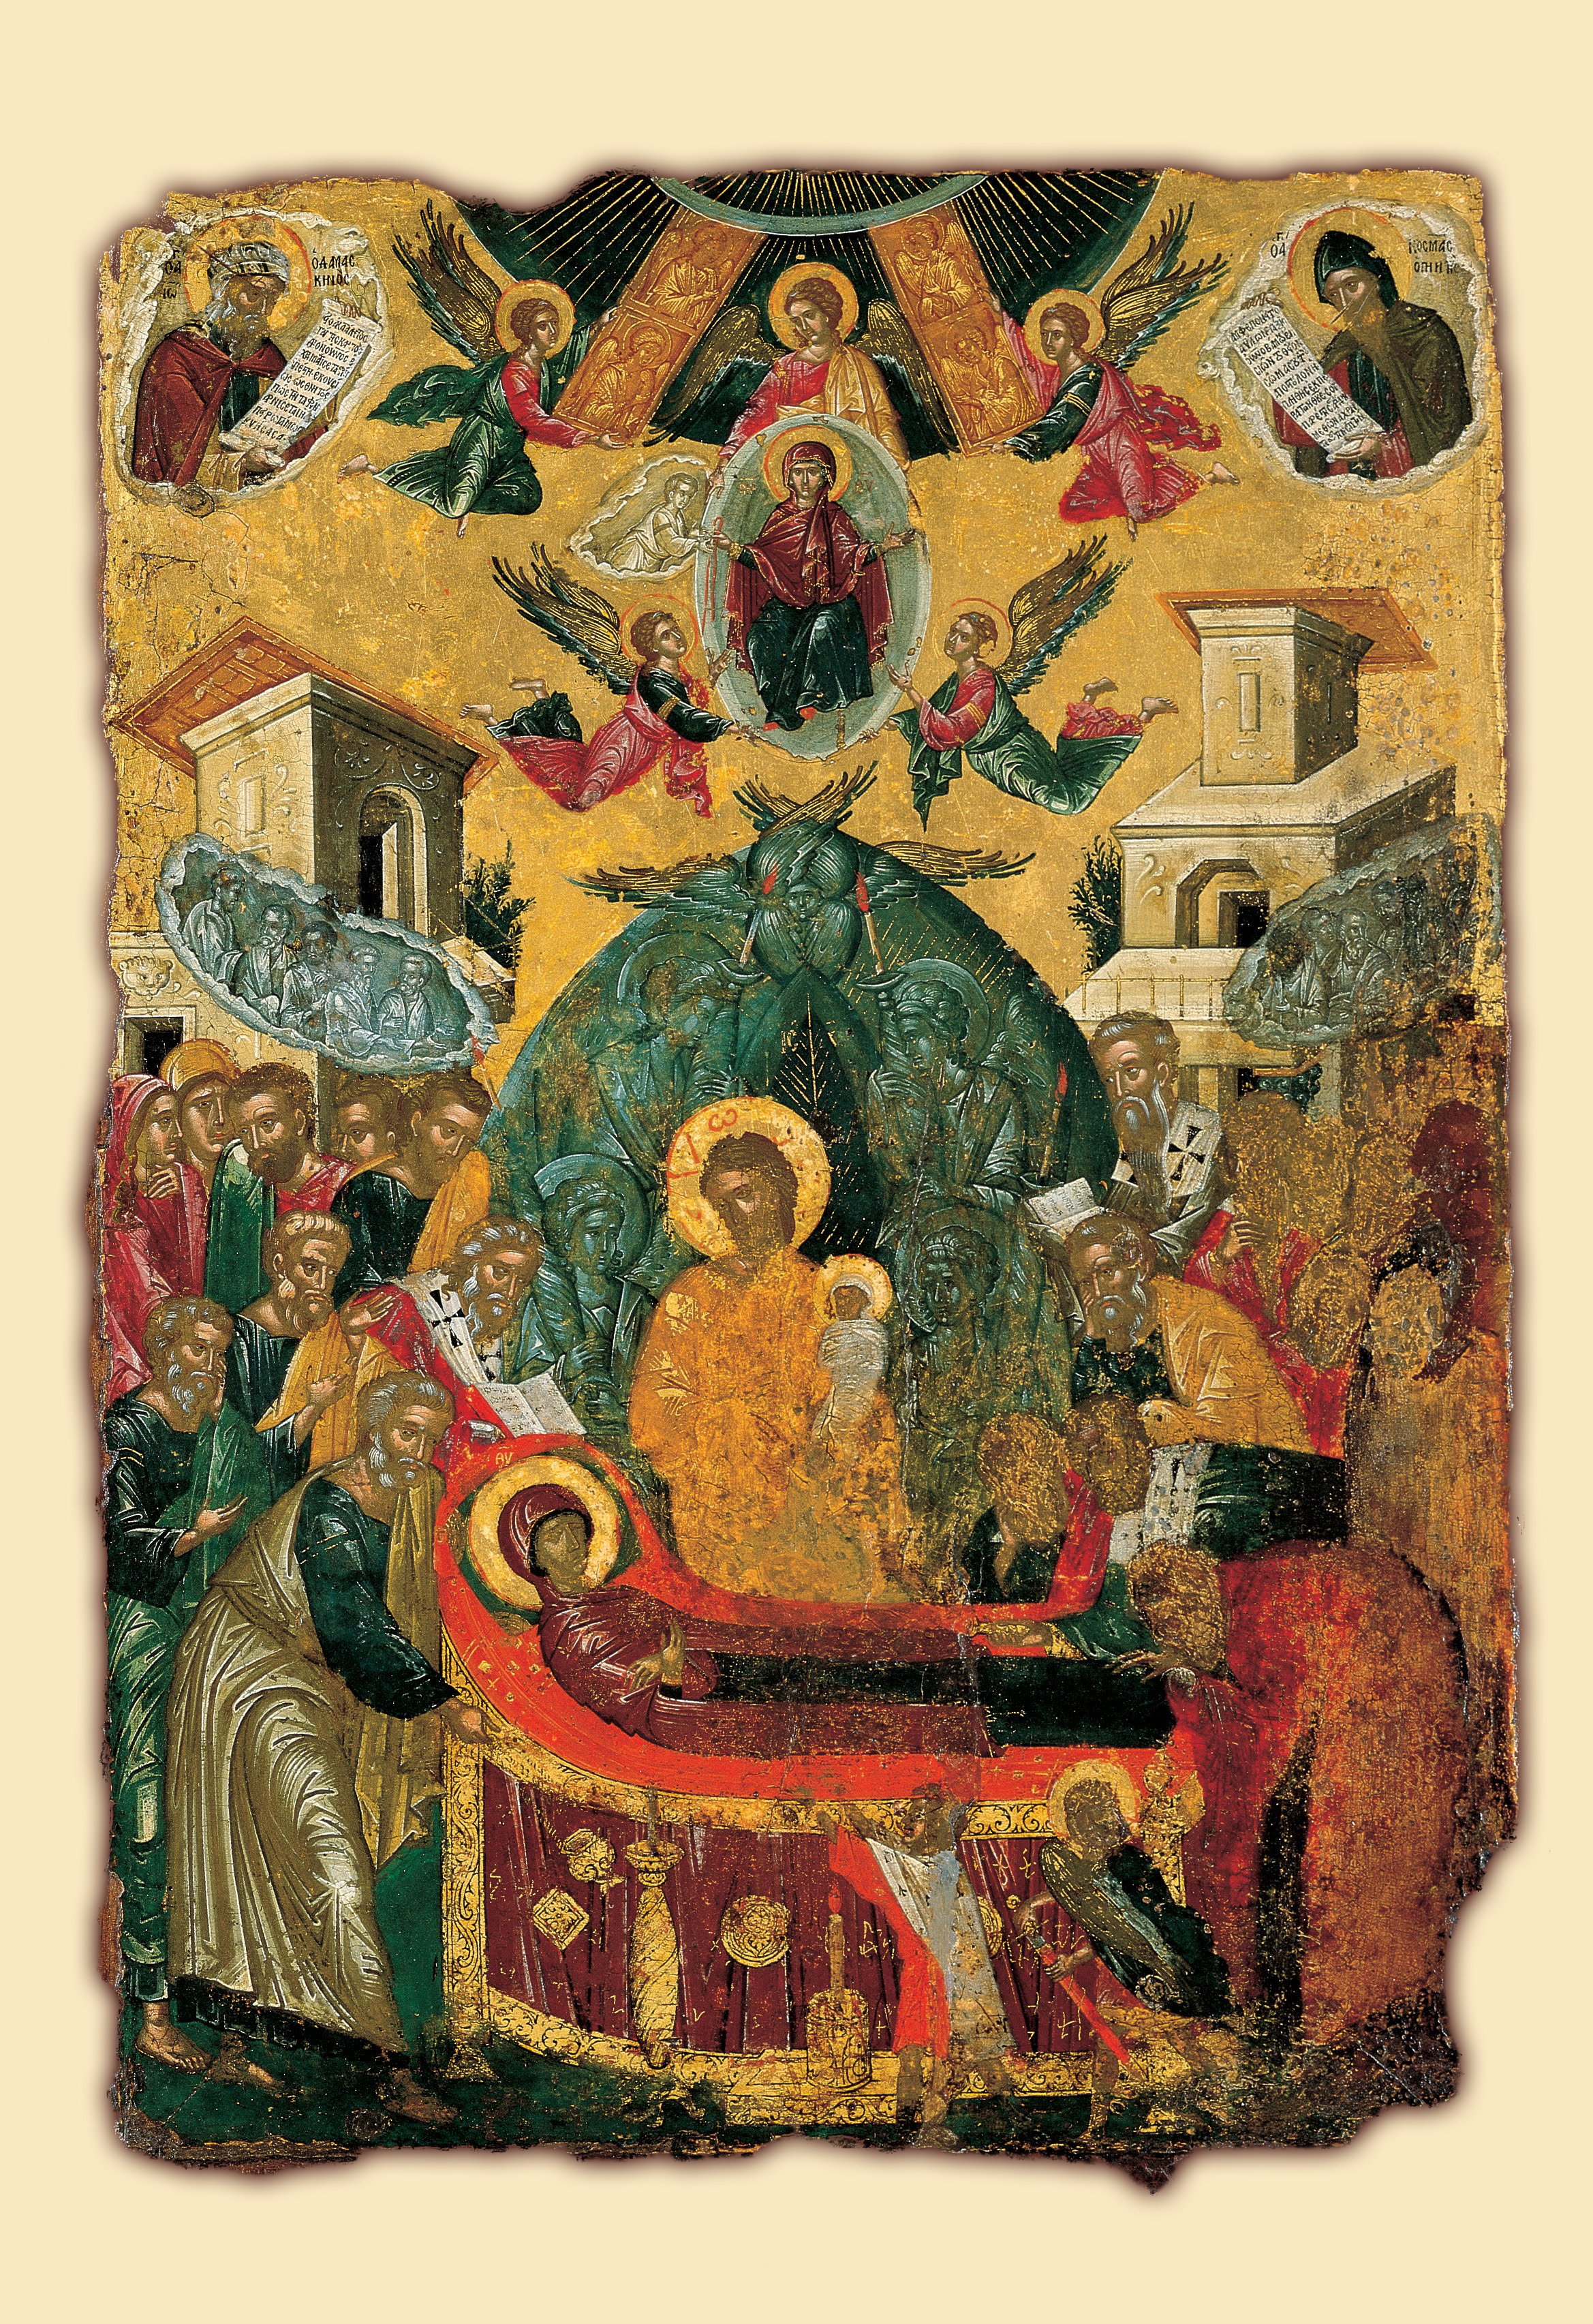 The Dormition of the Virgin - Google Art Project